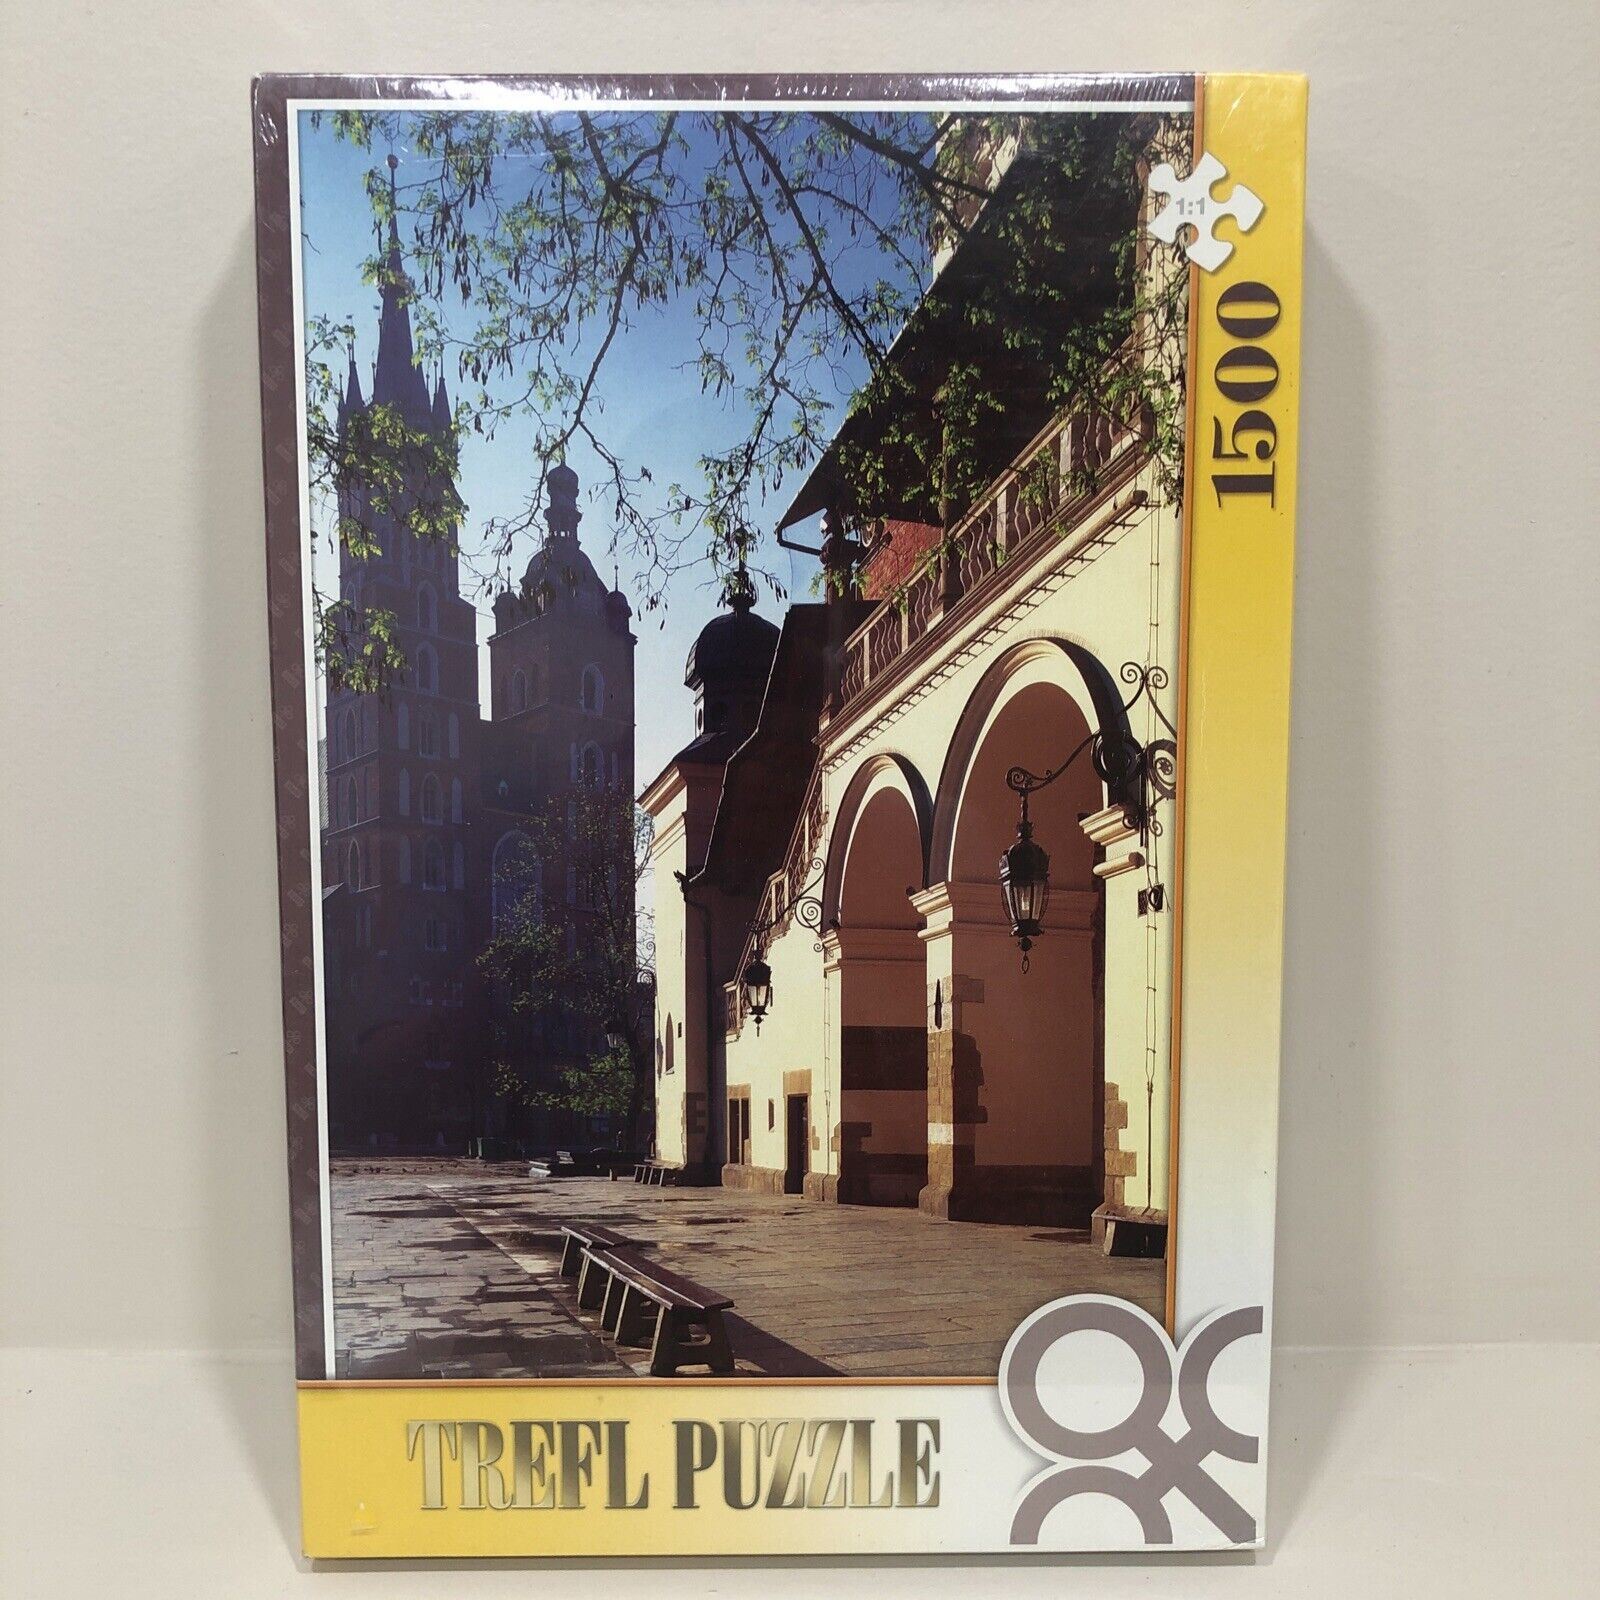 Trefl 1500 Piece Puzzle - 26058 Cloth Hall & The Church of Our Lady, Cracow NEW - $23.21